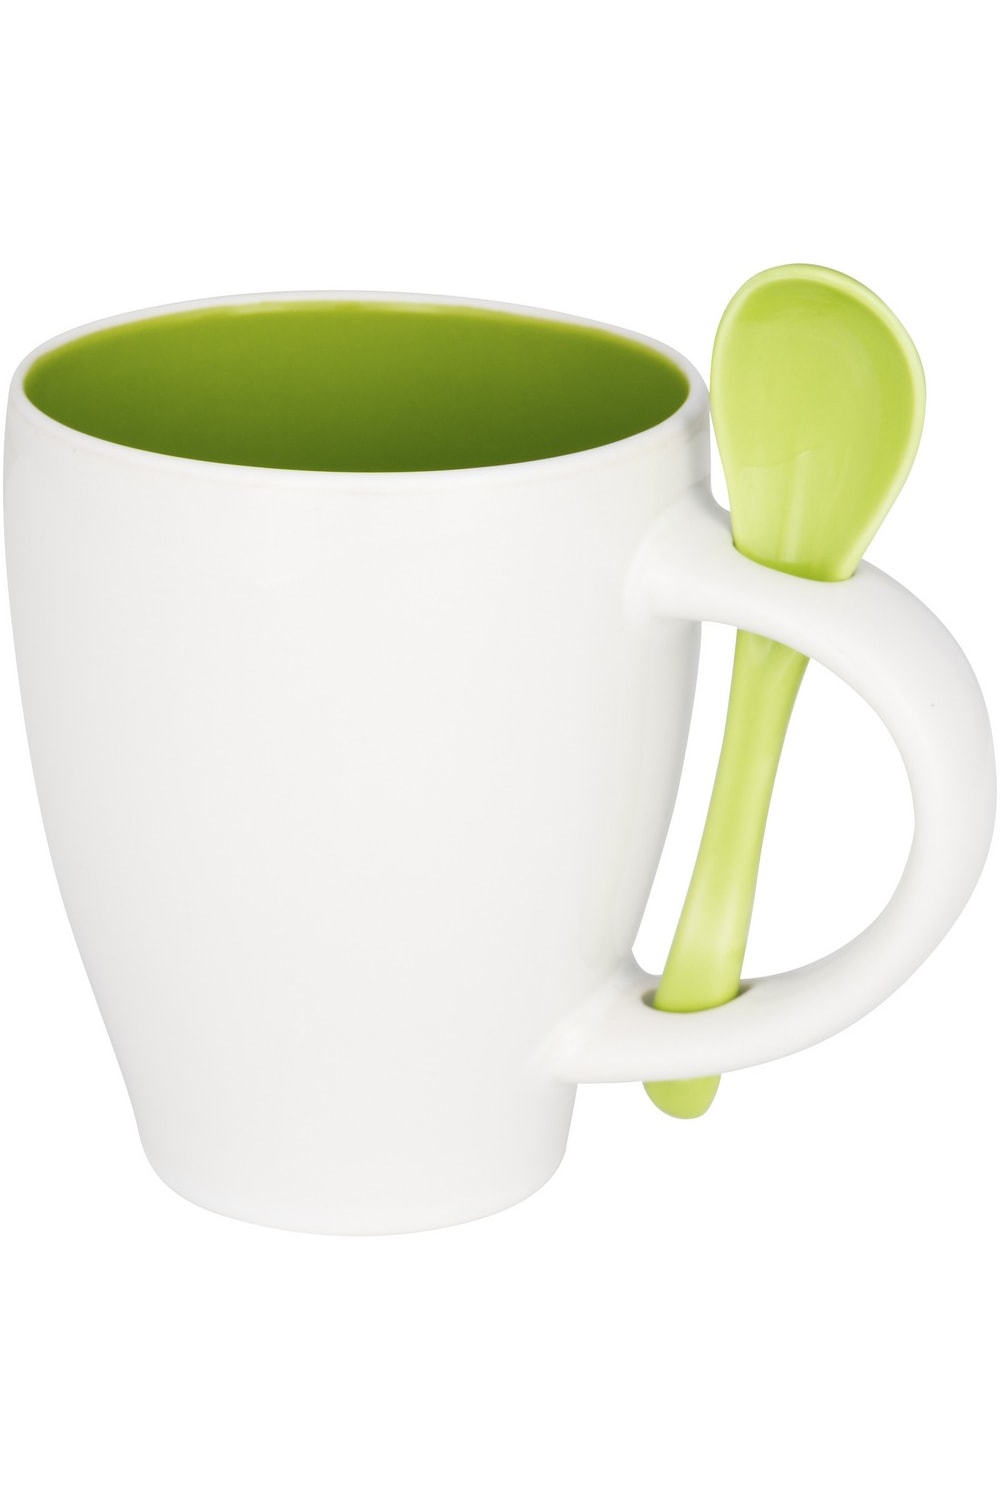 Bullet Nadu Ceramic Mug With Spoon (Pack of 2) (Green) (One Size)